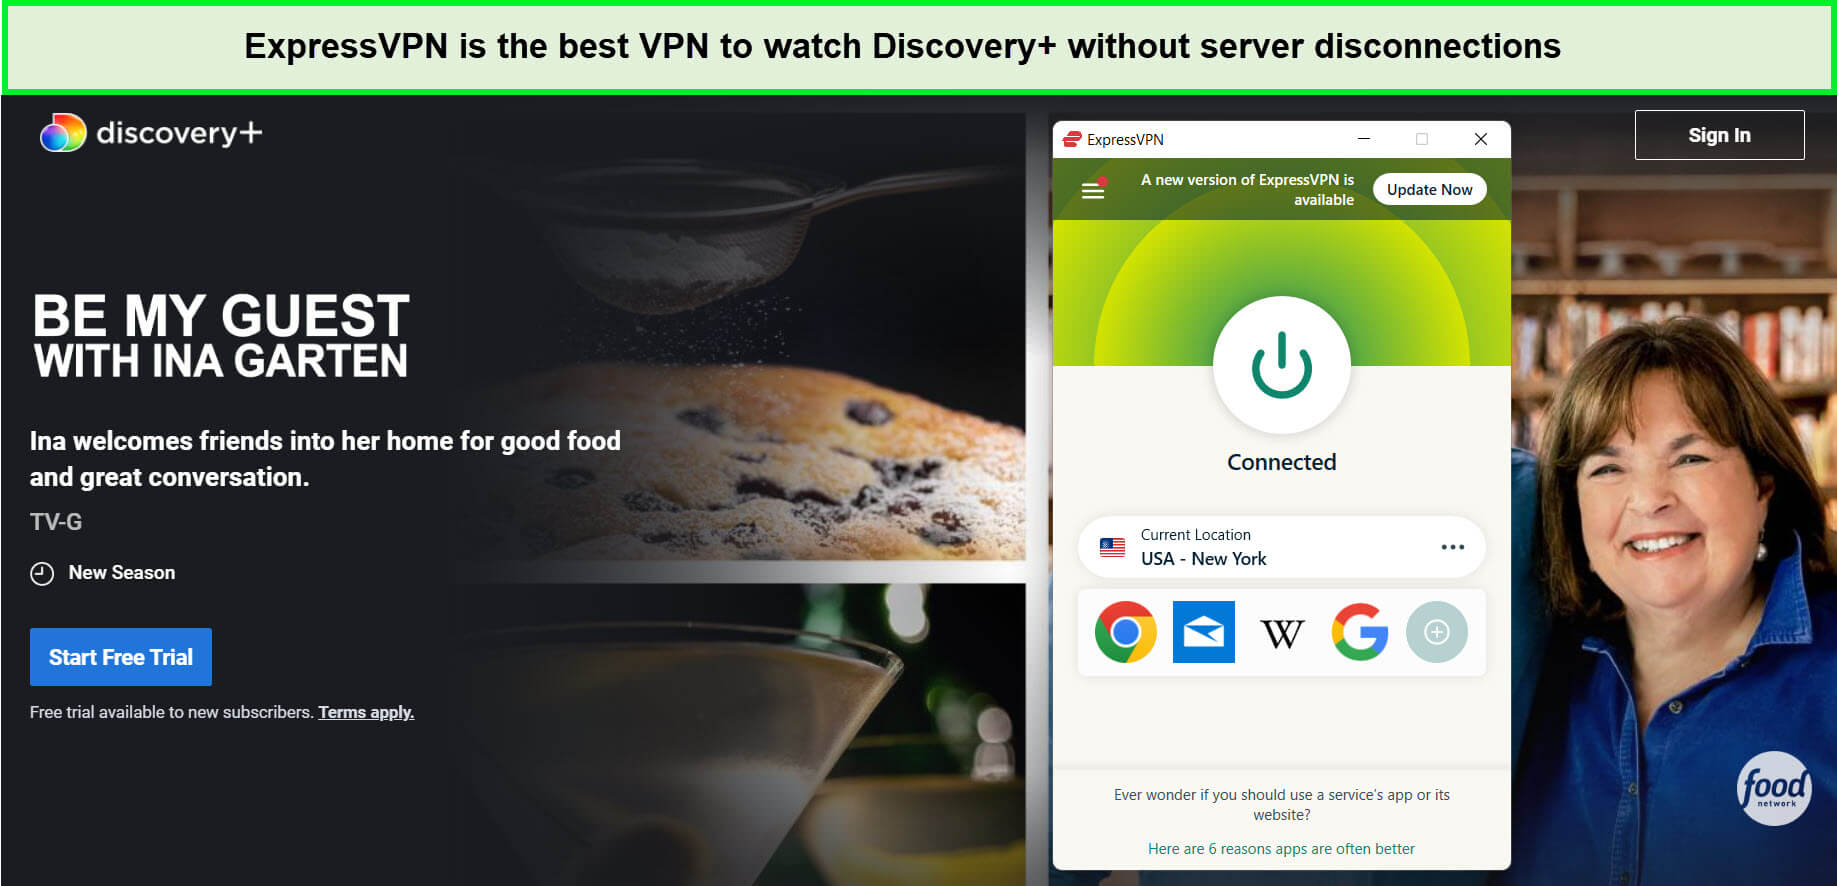 expressvpn-unblocks-be-my-guest-with-ina-garten-on-discovery-plus-in-ca